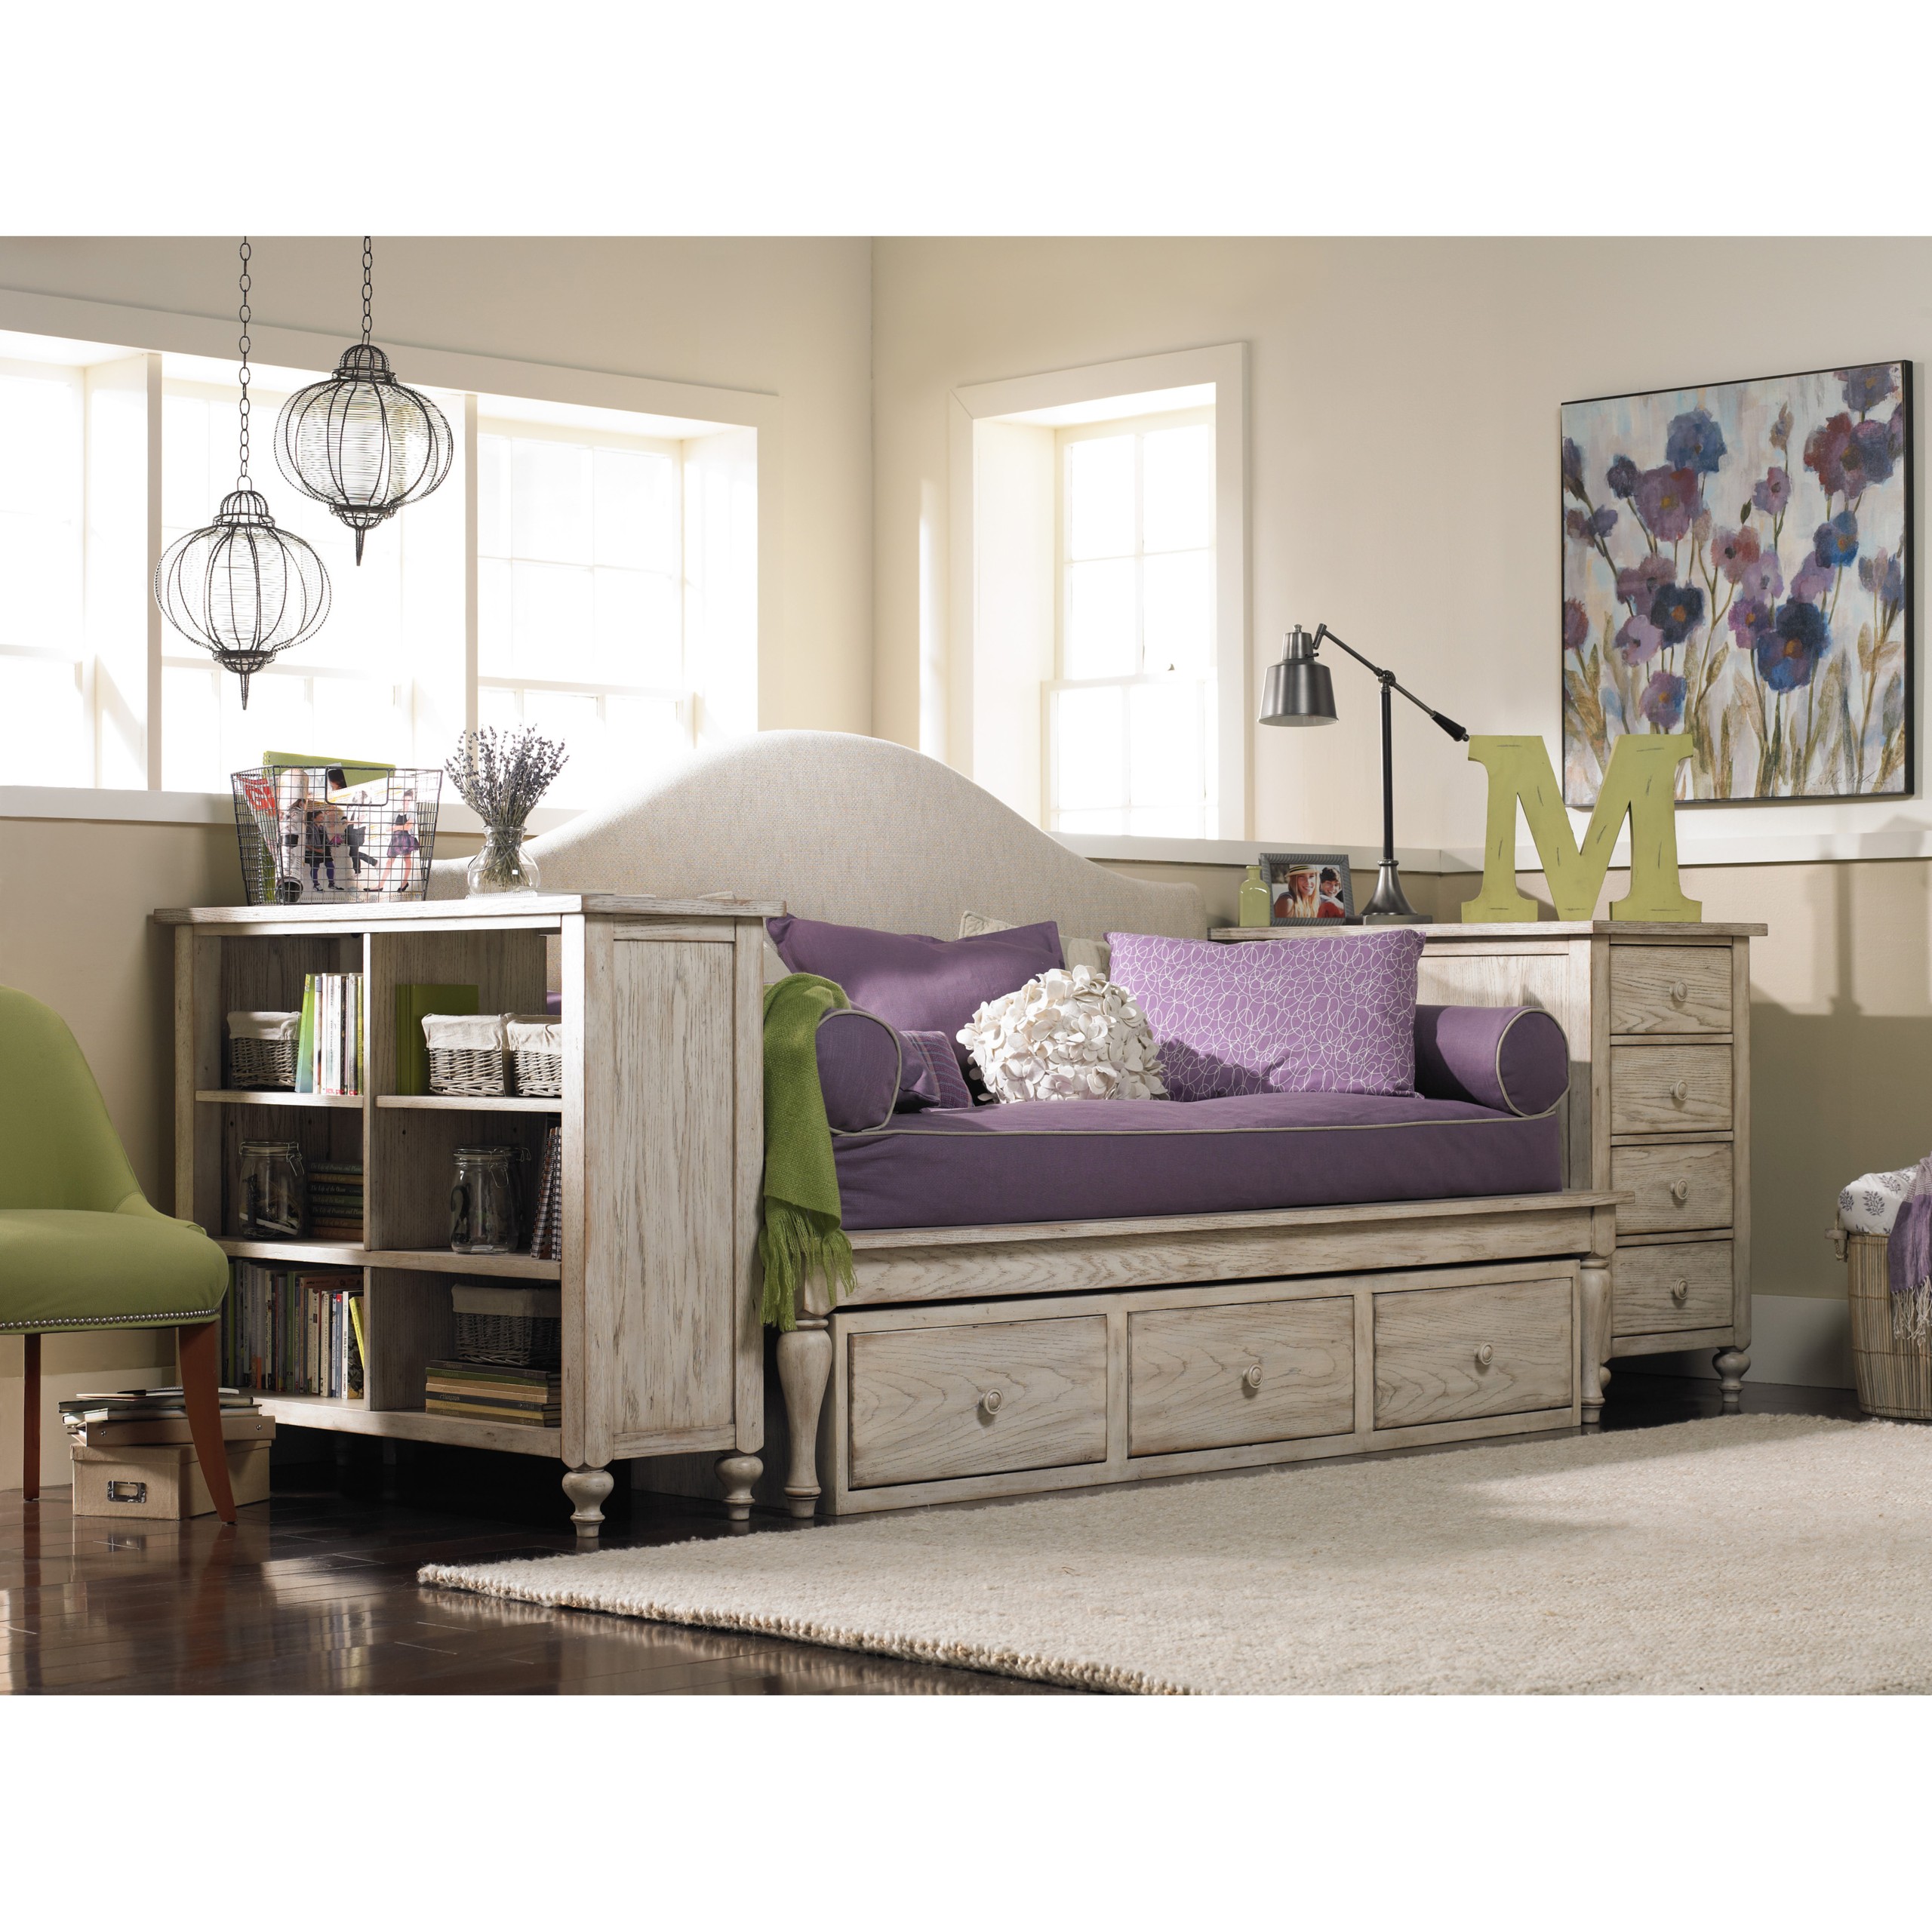 Full Size Daybed With Storage Drawers Ideas on Foter